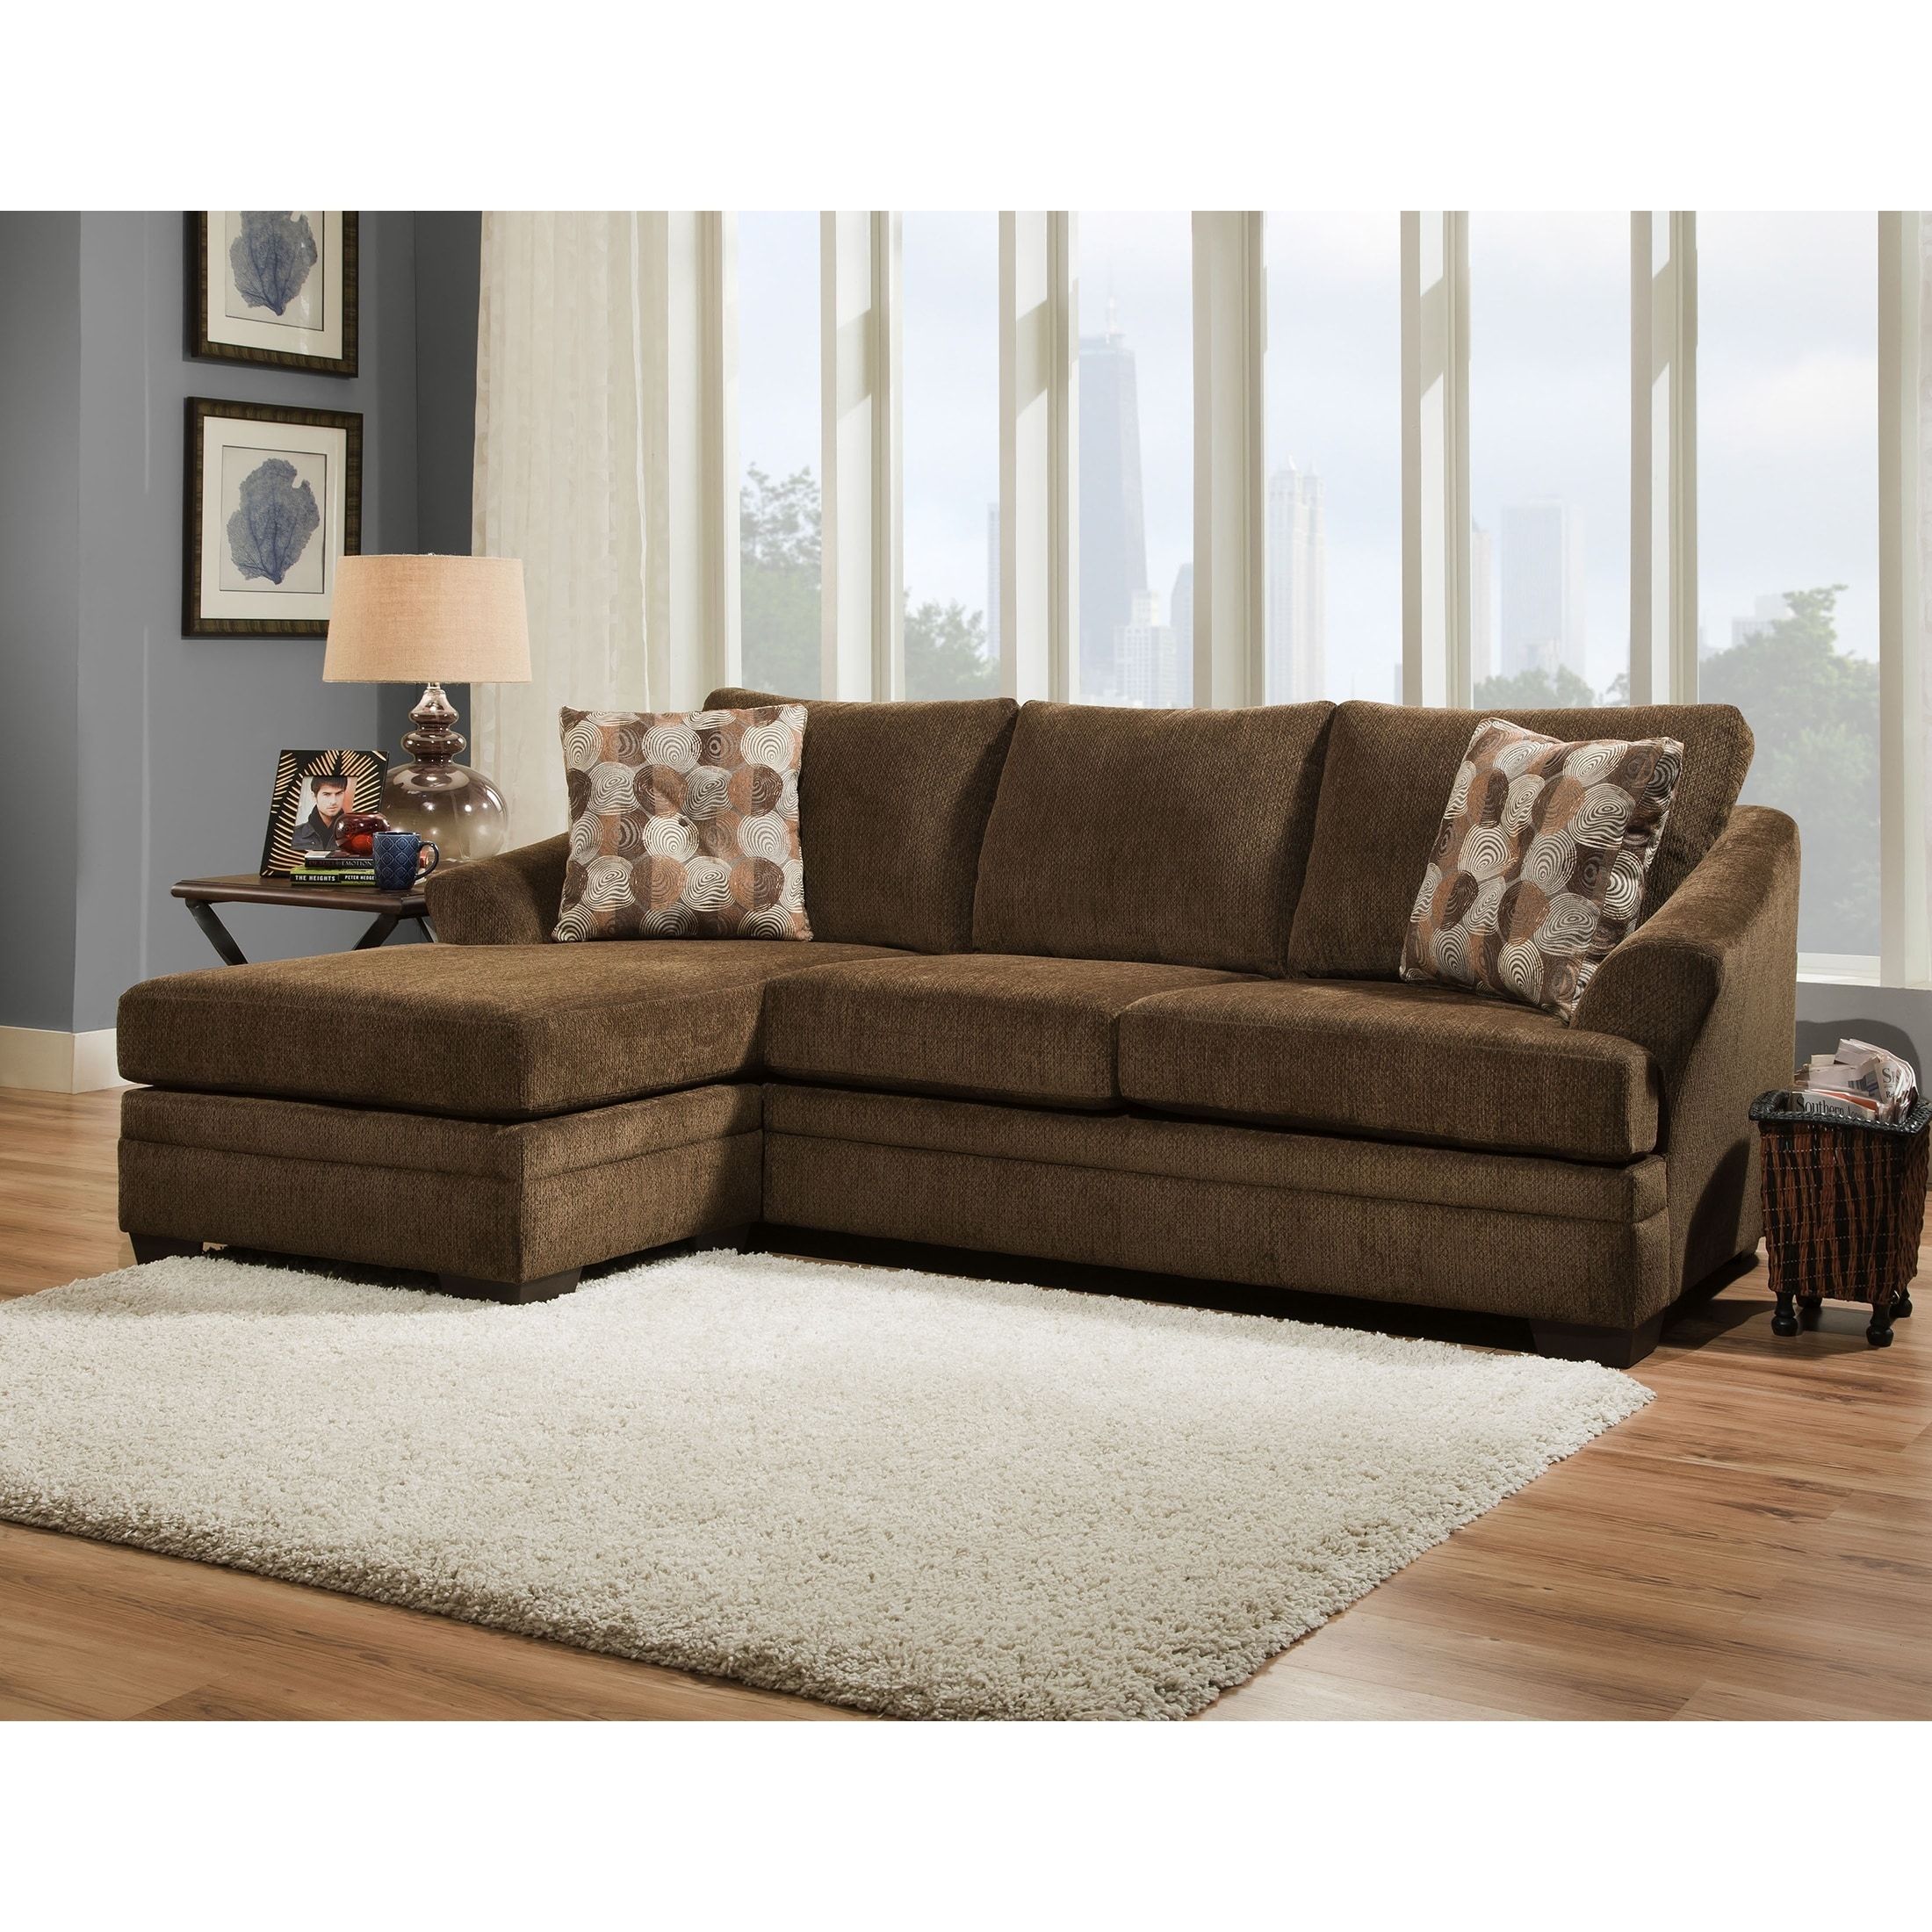 Simmons Upholstery Albany Sofa Chaise – Free Shipping Today Inside Simmons Chaise Sofas (View 1 of 10)